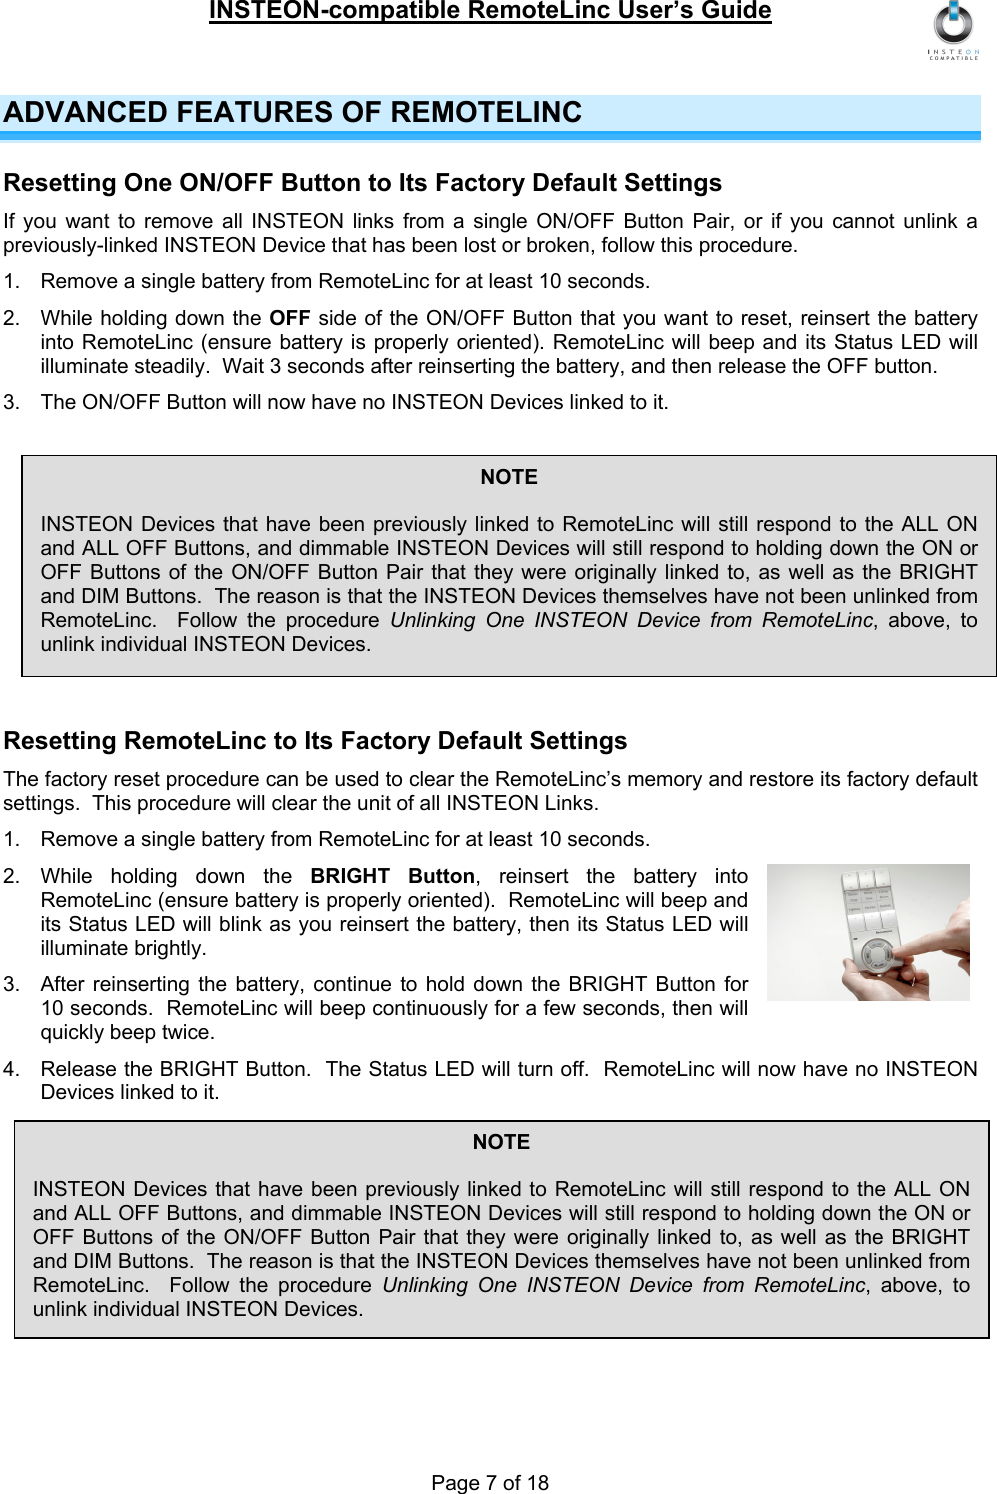 INSTEON-compatible RemoteLinc User’s Guide Page 7 of 18 ADVANCED FEATURES OF REMOTELINC Resetting One ON/OFF Button to Its Factory Default Settings If you want to remove all INSTEON links from a single ON/OFF Button Pair, or if you cannot unlink a previously-linked INSTEON Device that has been lost or broken, follow this procedure. 1.  Remove a single battery from RemoteLinc for at least 10 seconds. 2.  While holding down the OFF side of the ON/OFF Button that you want to reset, reinsert the battery into RemoteLinc (ensure battery is properly oriented). RemoteLinc will beep and its Status LED will illuminate steadily.  Wait 3 seconds after reinserting the battery, and then release the OFF button. 3.  The ON/OFF Button will now have no INSTEON Devices linked to it.  Resetting RemoteLinc to Its Factory Default Settings The factory reset procedure can be used to clear the RemoteLinc’s memory and restore its factory default settings.  This procedure will clear the unit of all INSTEON Links. 1.  Remove a single battery from RemoteLinc for at least 10 seconds. 2. While holding down the BRIGHT Button, reinsert the battery into RemoteLinc (ensure battery is properly oriented).  RemoteLinc will beep and its Status LED will blink as you reinsert the battery, then its Status LED will illuminate brightly. 3.  After reinserting the battery, continue to hold down the BRIGHT Button for 10 seconds.  RemoteLinc will beep continuously for a few seconds, then will quickly beep twice. 4.  Release the BRIGHT Button.  The Status LED will turn off.  RemoteLinc will now have no INSTEON Devices linked to it.  NOTE  INSTEON Devices that have been previously linked to RemoteLinc will still respond to the ALL ON and ALL OFF Buttons, and dimmable INSTEON Devices will still respond to holding down the ON or OFF Buttons of the ON/OFF Button Pair that they were originally linked to, as well as the BRIGHT and DIM Buttons.  The reason is that the INSTEON Devices themselves have not been unlinked from RemoteLinc.  Follow the procedure Unlinking One INSTEON Device from RemoteLinc, above, to unlink individual INSTEON Devices. NOTE  INSTEON Devices that have been previously linked to RemoteLinc will still respond to the ALL ON and ALL OFF Buttons, and dimmable INSTEON Devices will still respond to holding down the ON or OFF Buttons of the ON/OFF Button Pair that they were originally linked to, as well as the BRIGHT and DIM Buttons.  The reason is that the INSTEON Devices themselves have not been unlinked from RemoteLinc.  Follow the procedure Unlinking One INSTEON Device from RemoteLinc, above, to unlink individual INSTEON Devices. 